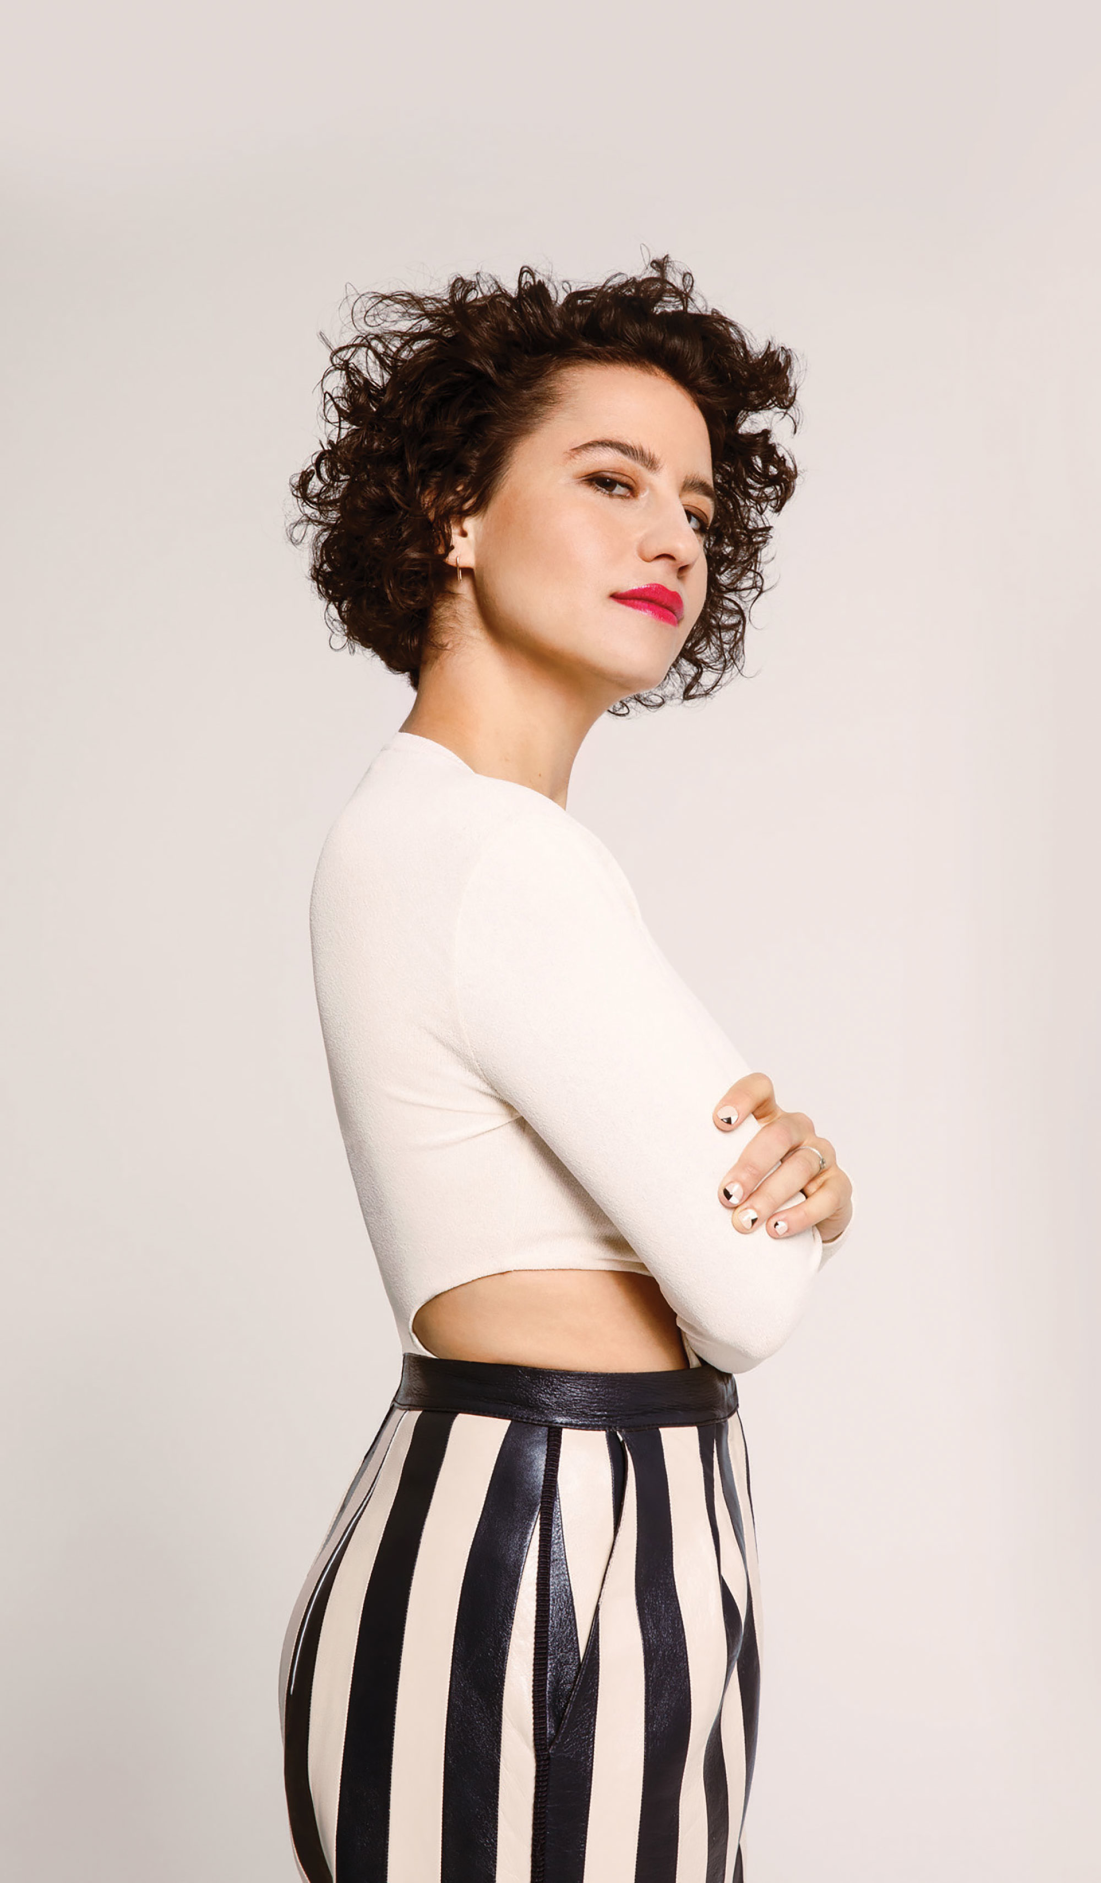 Talking to Ilana Glazer About Staying Optimistic as the Planet Burns